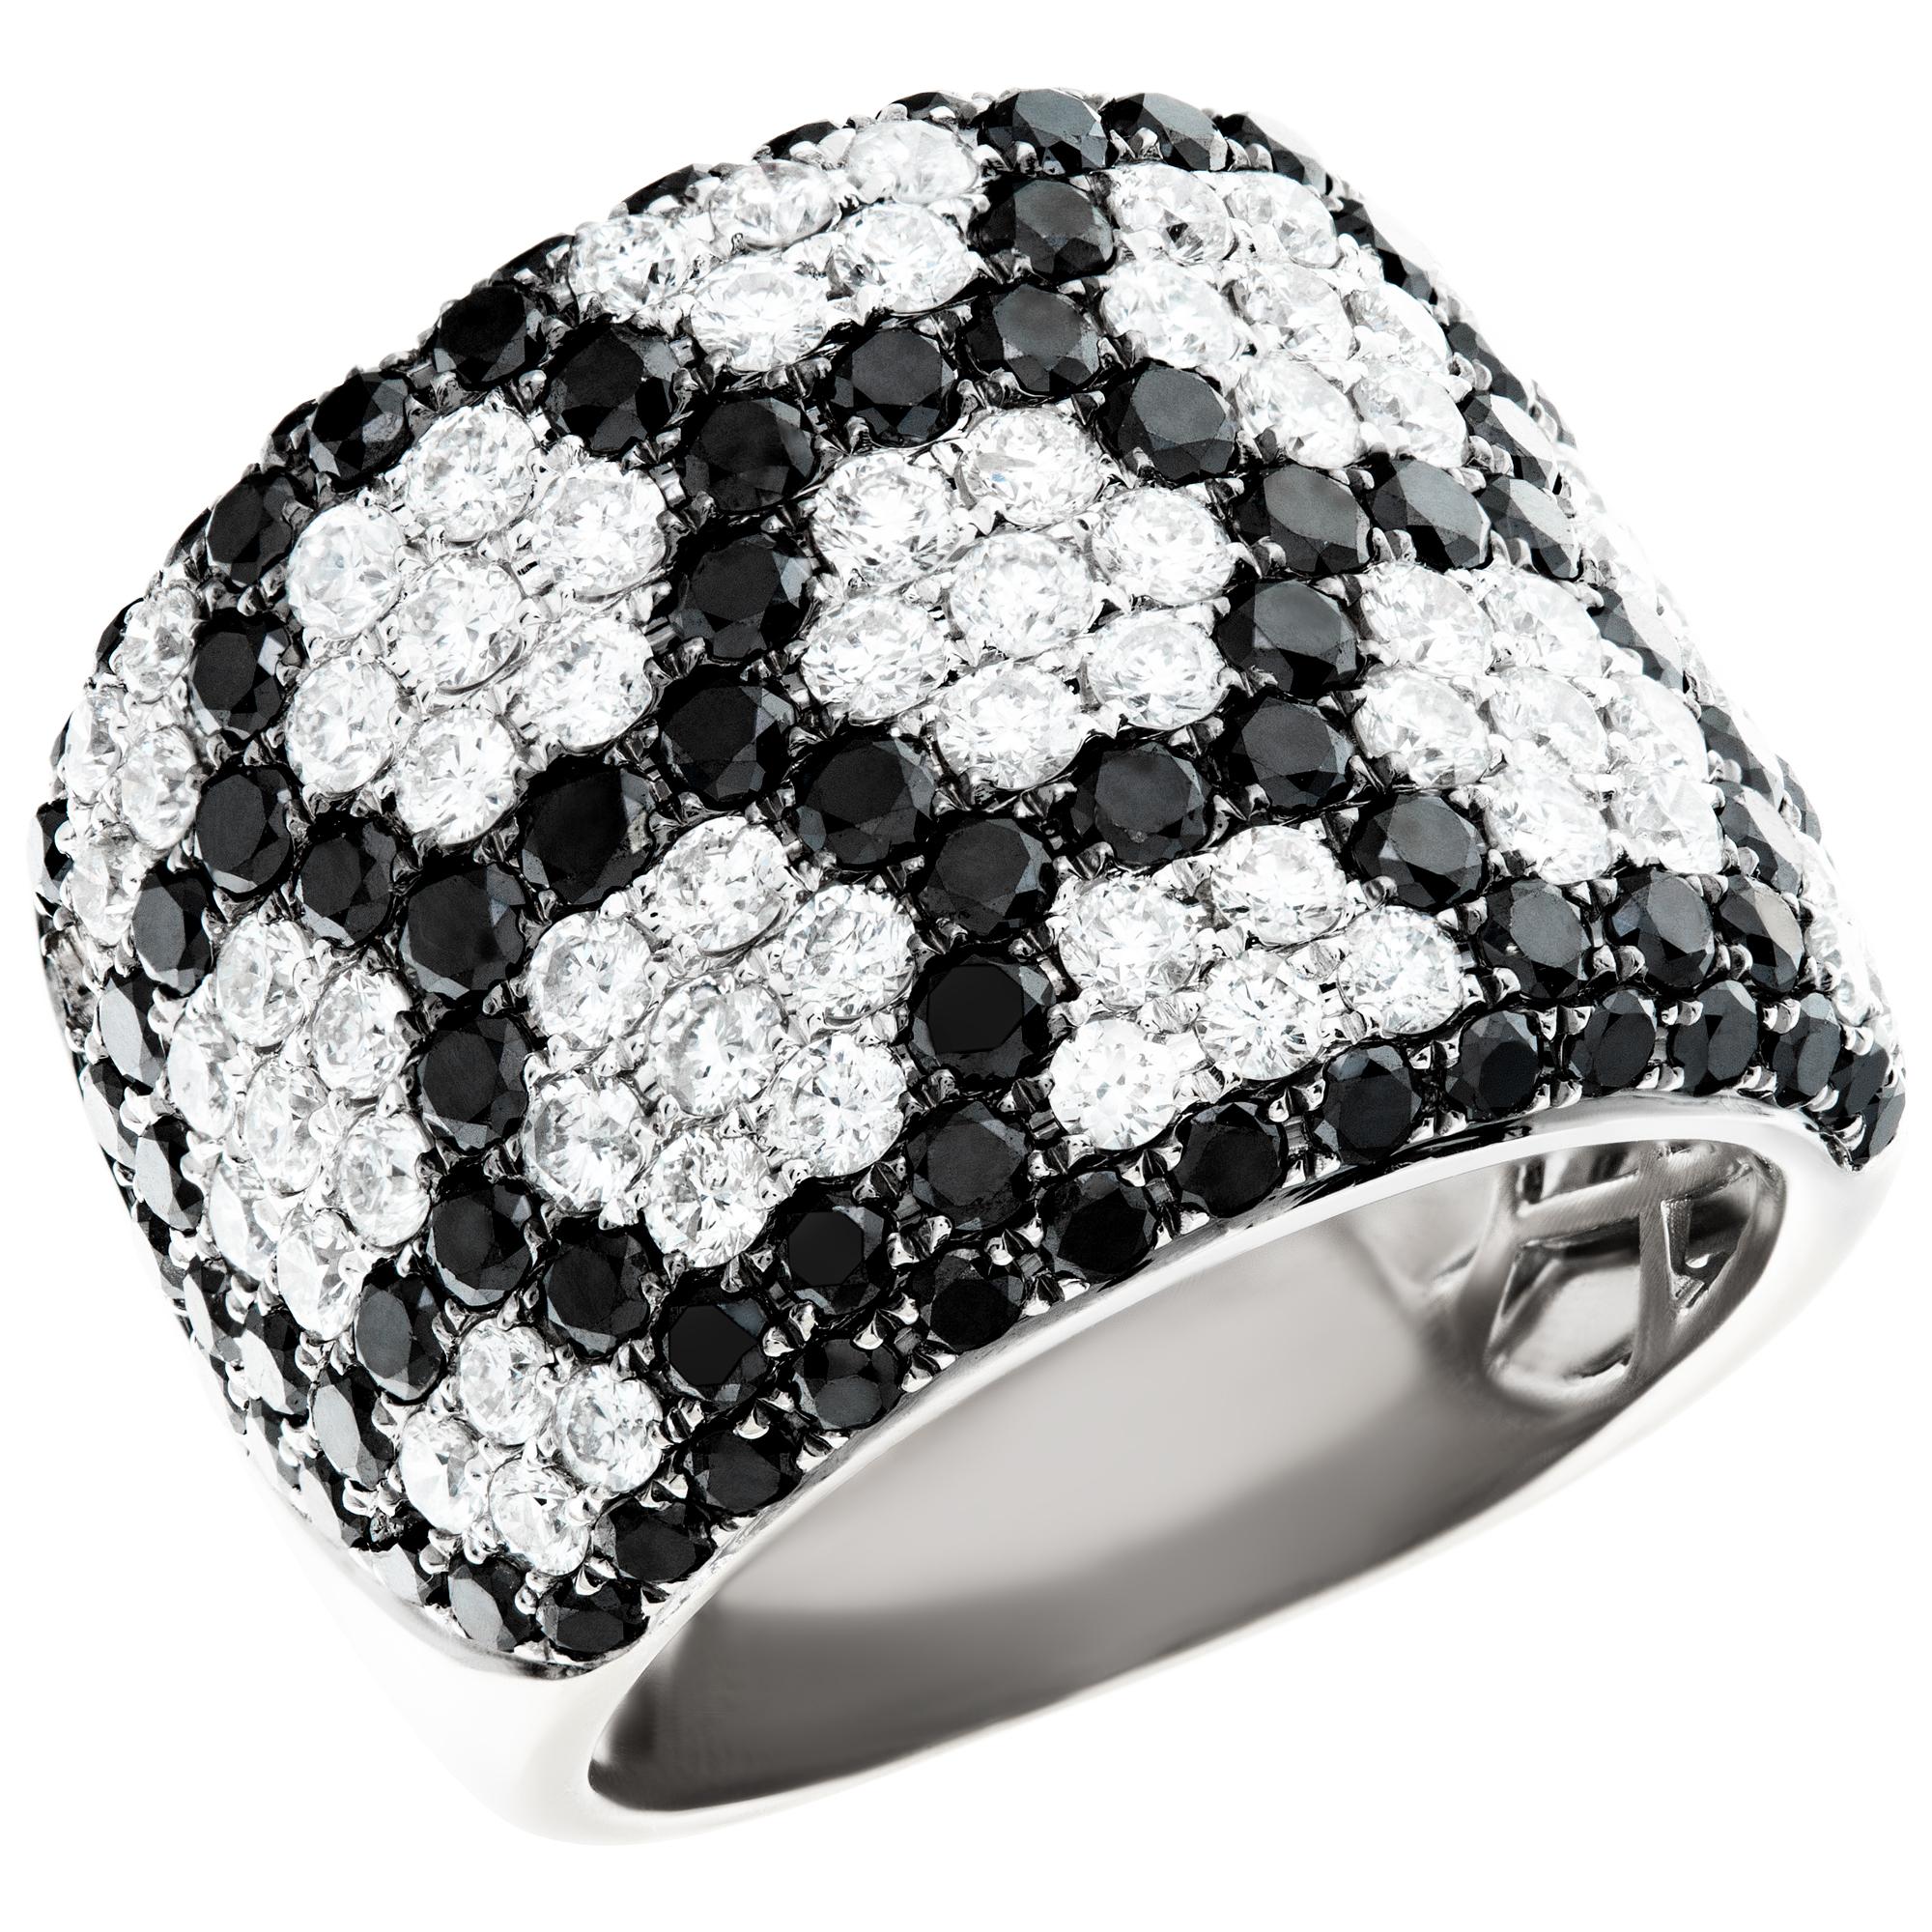 B&W diamonds ring set in white gold diamonds approx weight 3.00 carats Size 5. In Excellent Condition For Sale In Surfside, FL